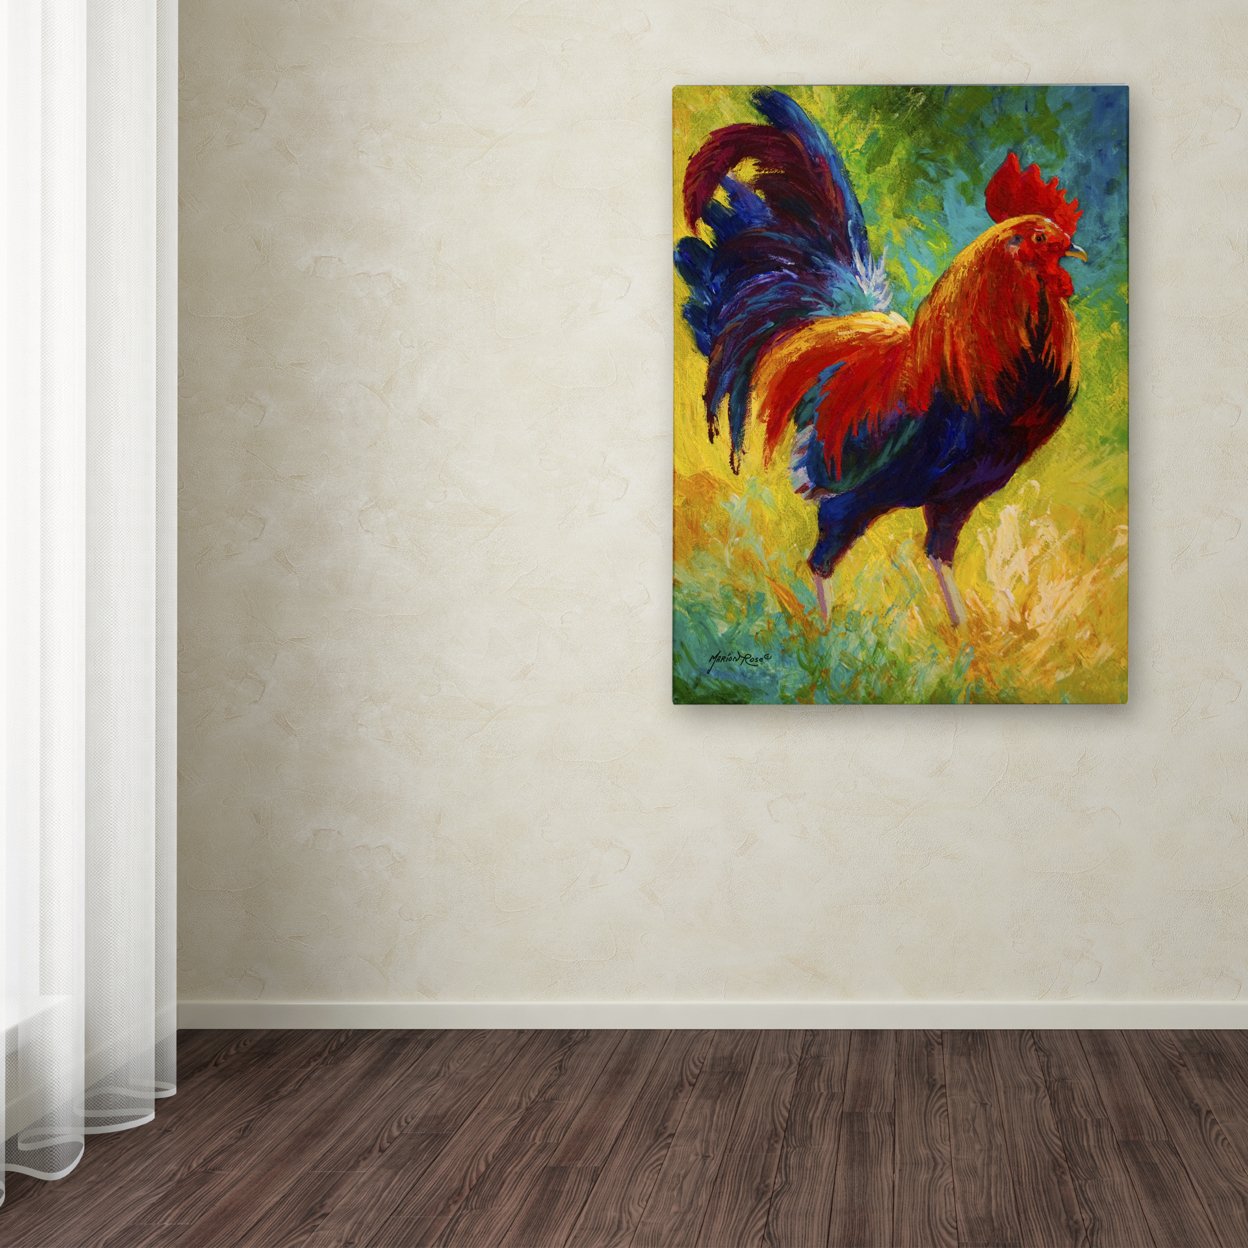 Marion Rose 'Hot Shot Rooster' Ready To Hang Canvas Art 18 X 24 Inches Made In USA